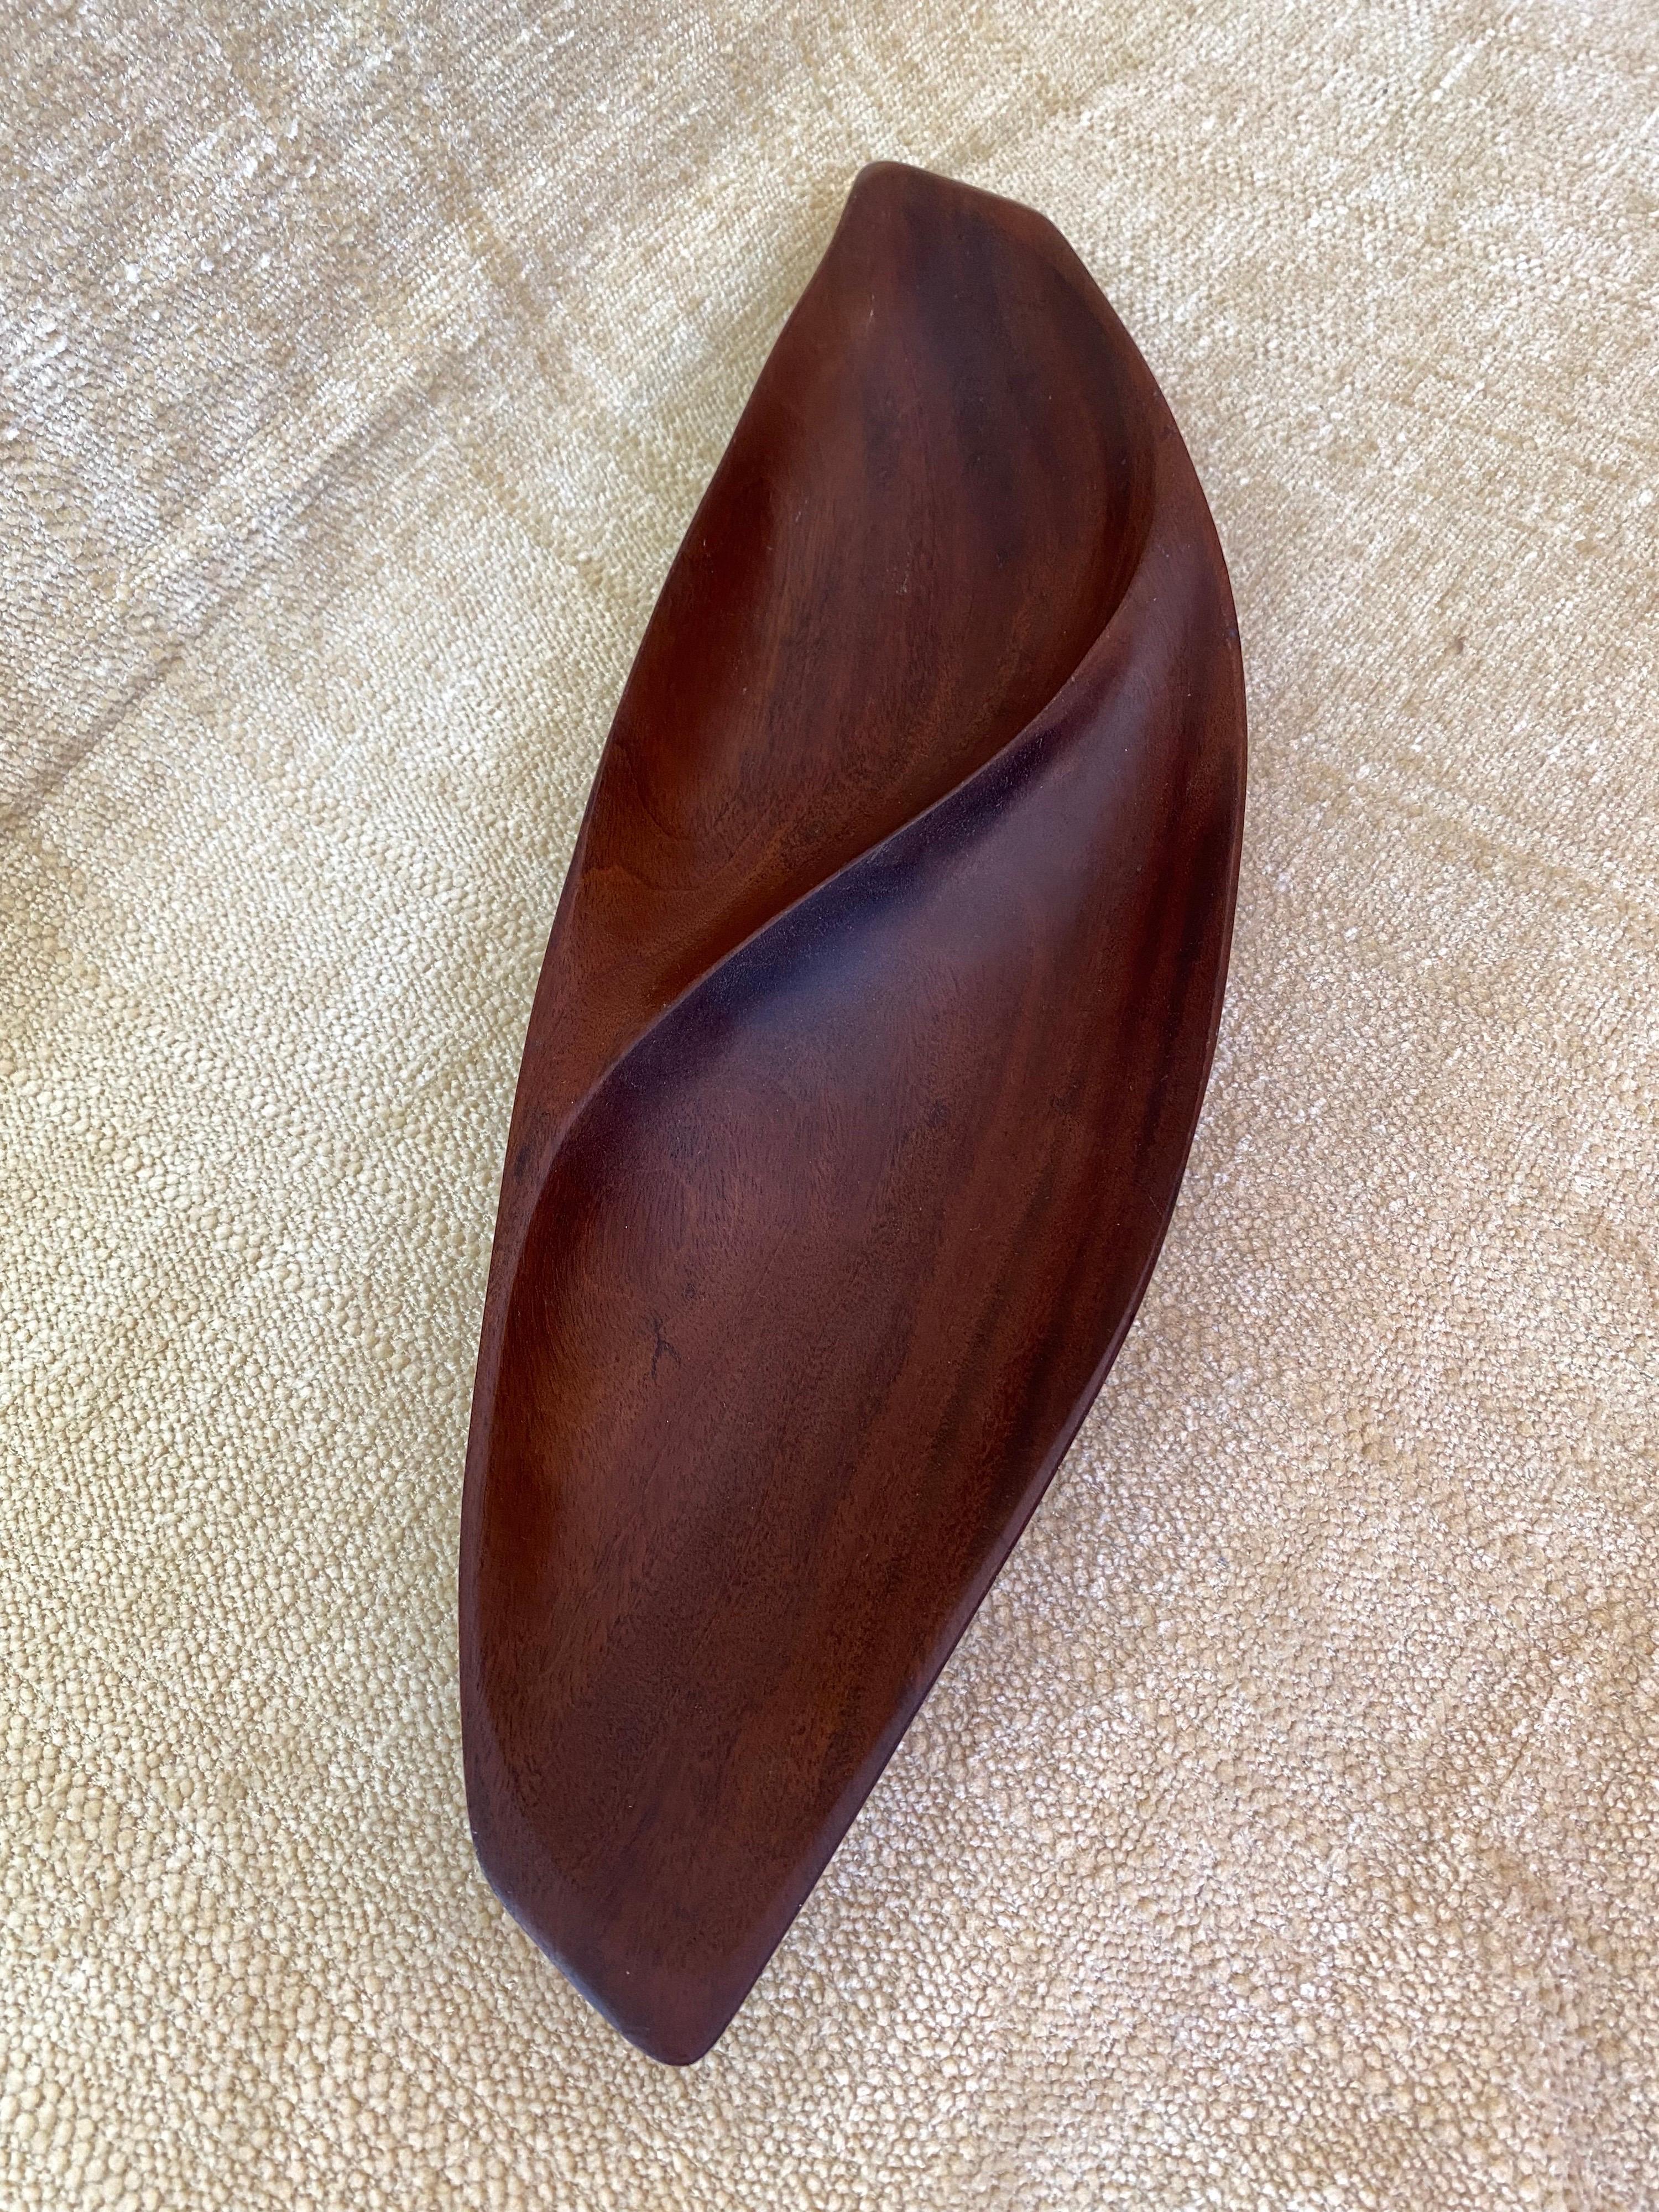 Emil Milan African bissilon wood long bowl. Bissilon is a dense wood, perfect for turning! Beautiful elongated shape with a curving center divide. Very nice original condition!